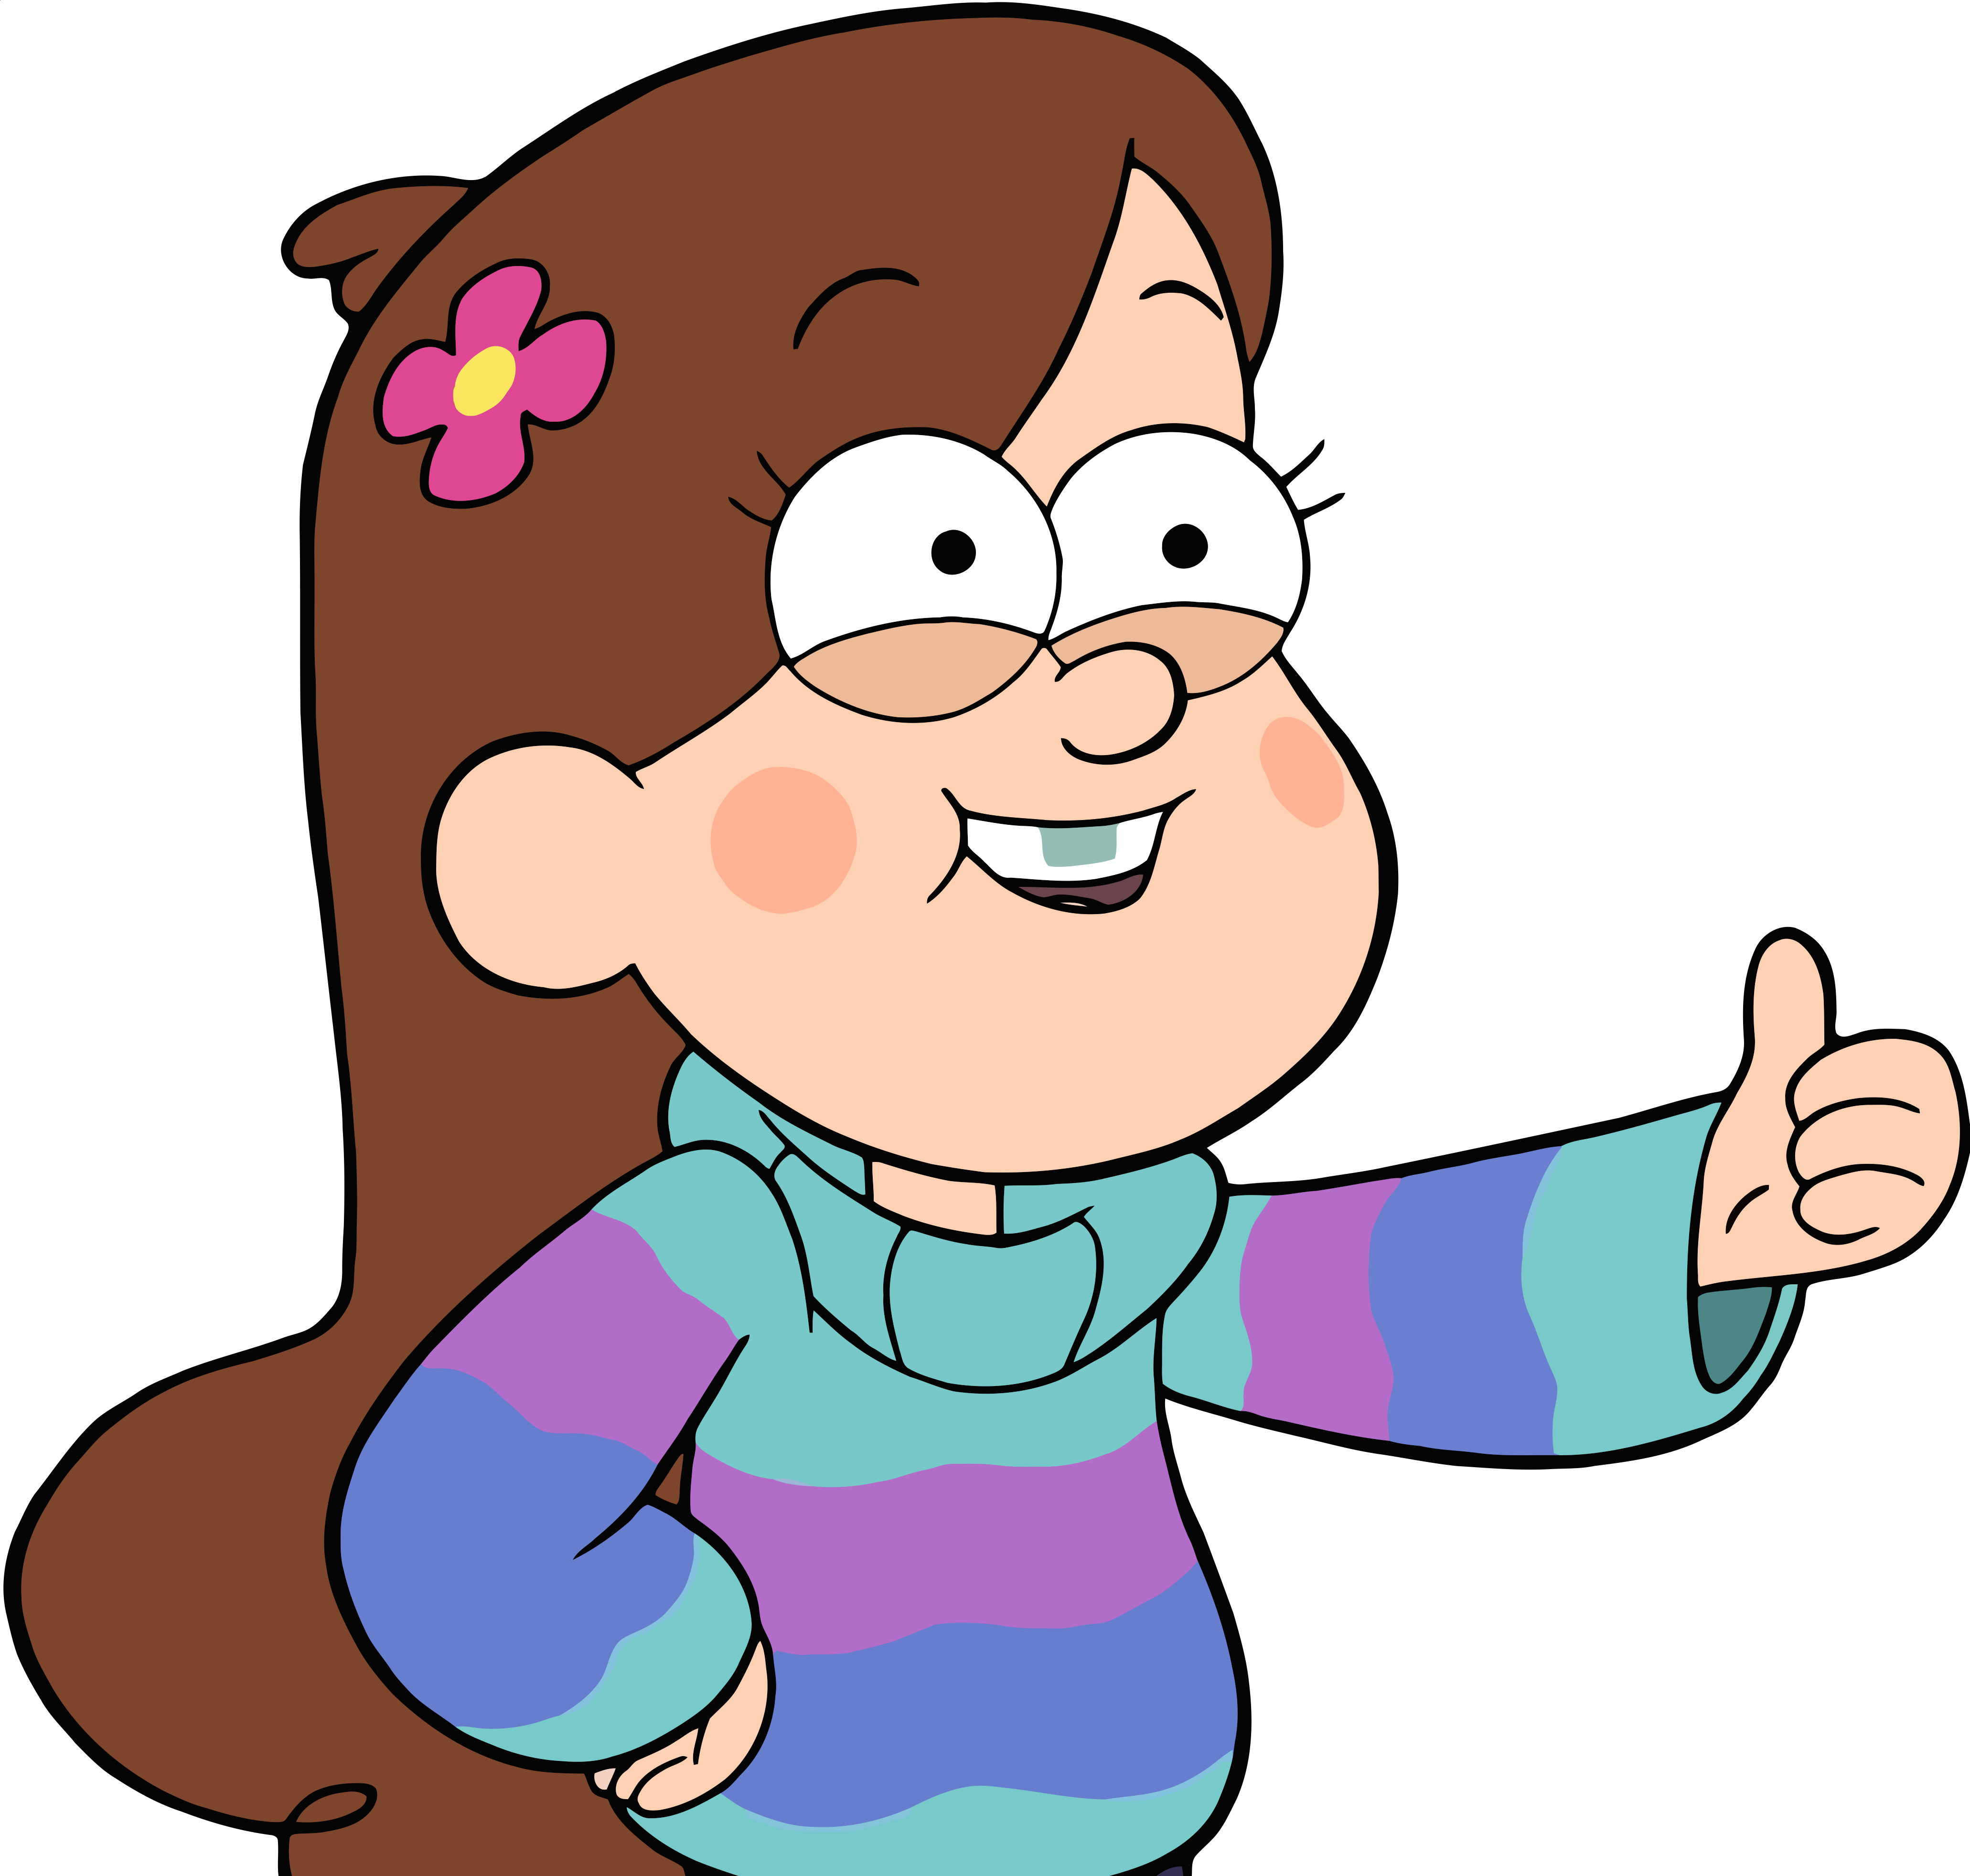 Image - S1e9 mabel thumbs up transparent.png - Gravity Falls Wiki 